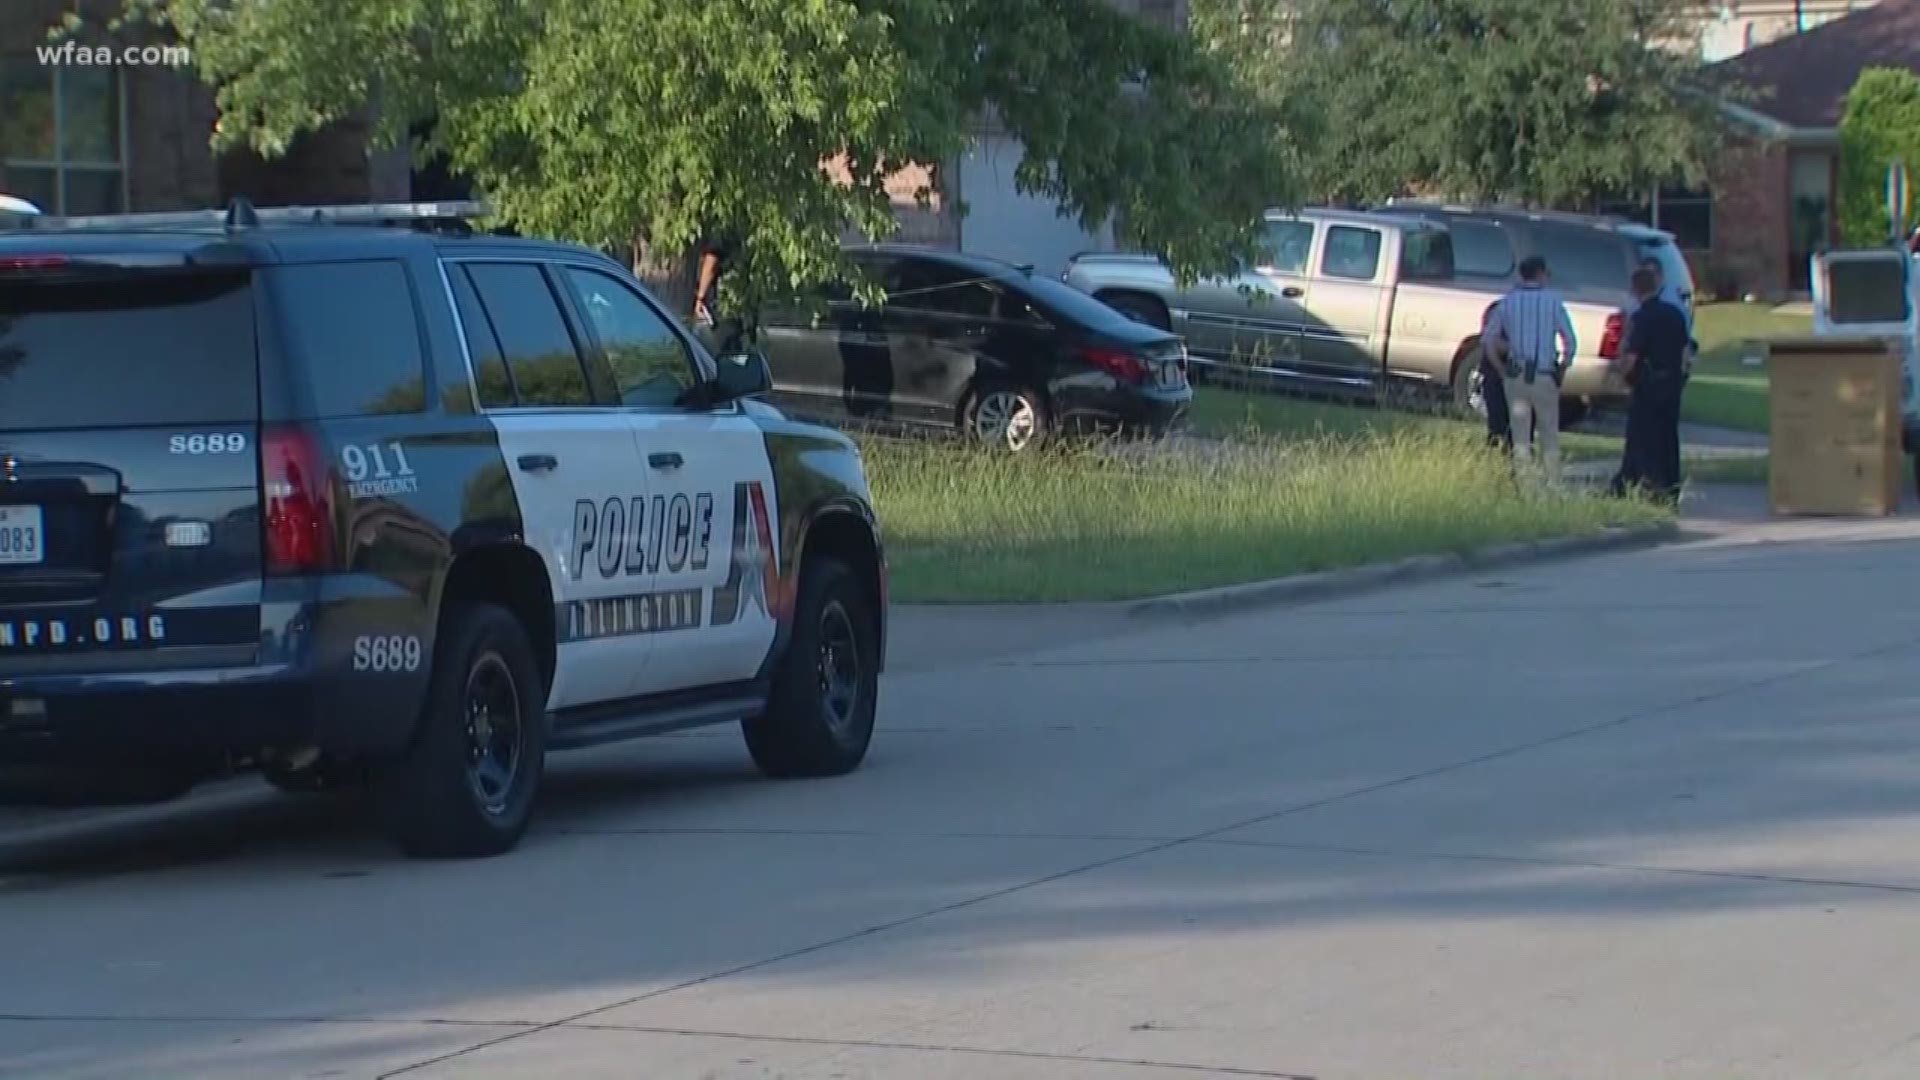 Police in Fort Worth and Arlington responded to a total of three shootings involving children Sunday. In two of the cases, police say, a juvenile sibling is suspected in the shootings. One of the victims, a 4-year-old boy, died, police said. More: https://on.wfaa.com/30kVkYL